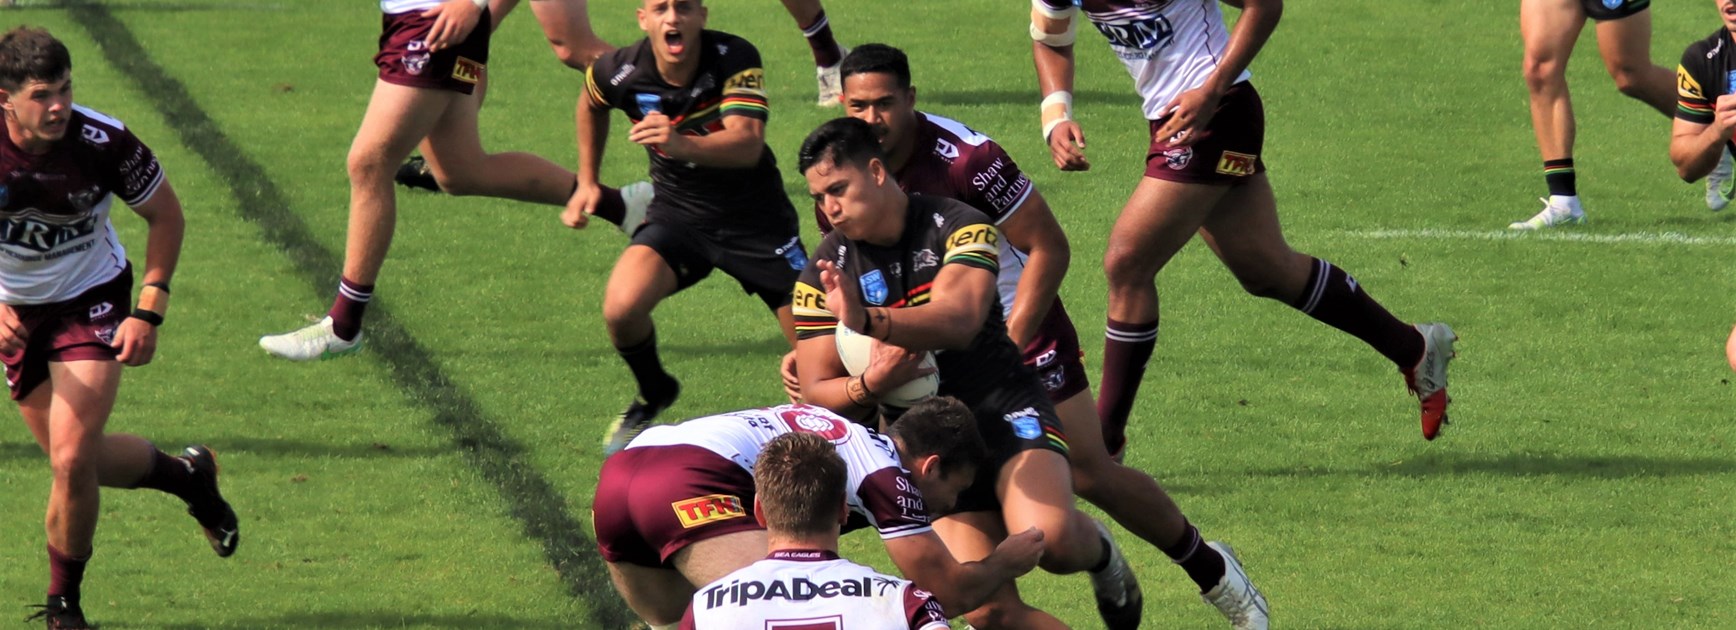 Sea Eagles lose to Panthers in Jersey Flegg